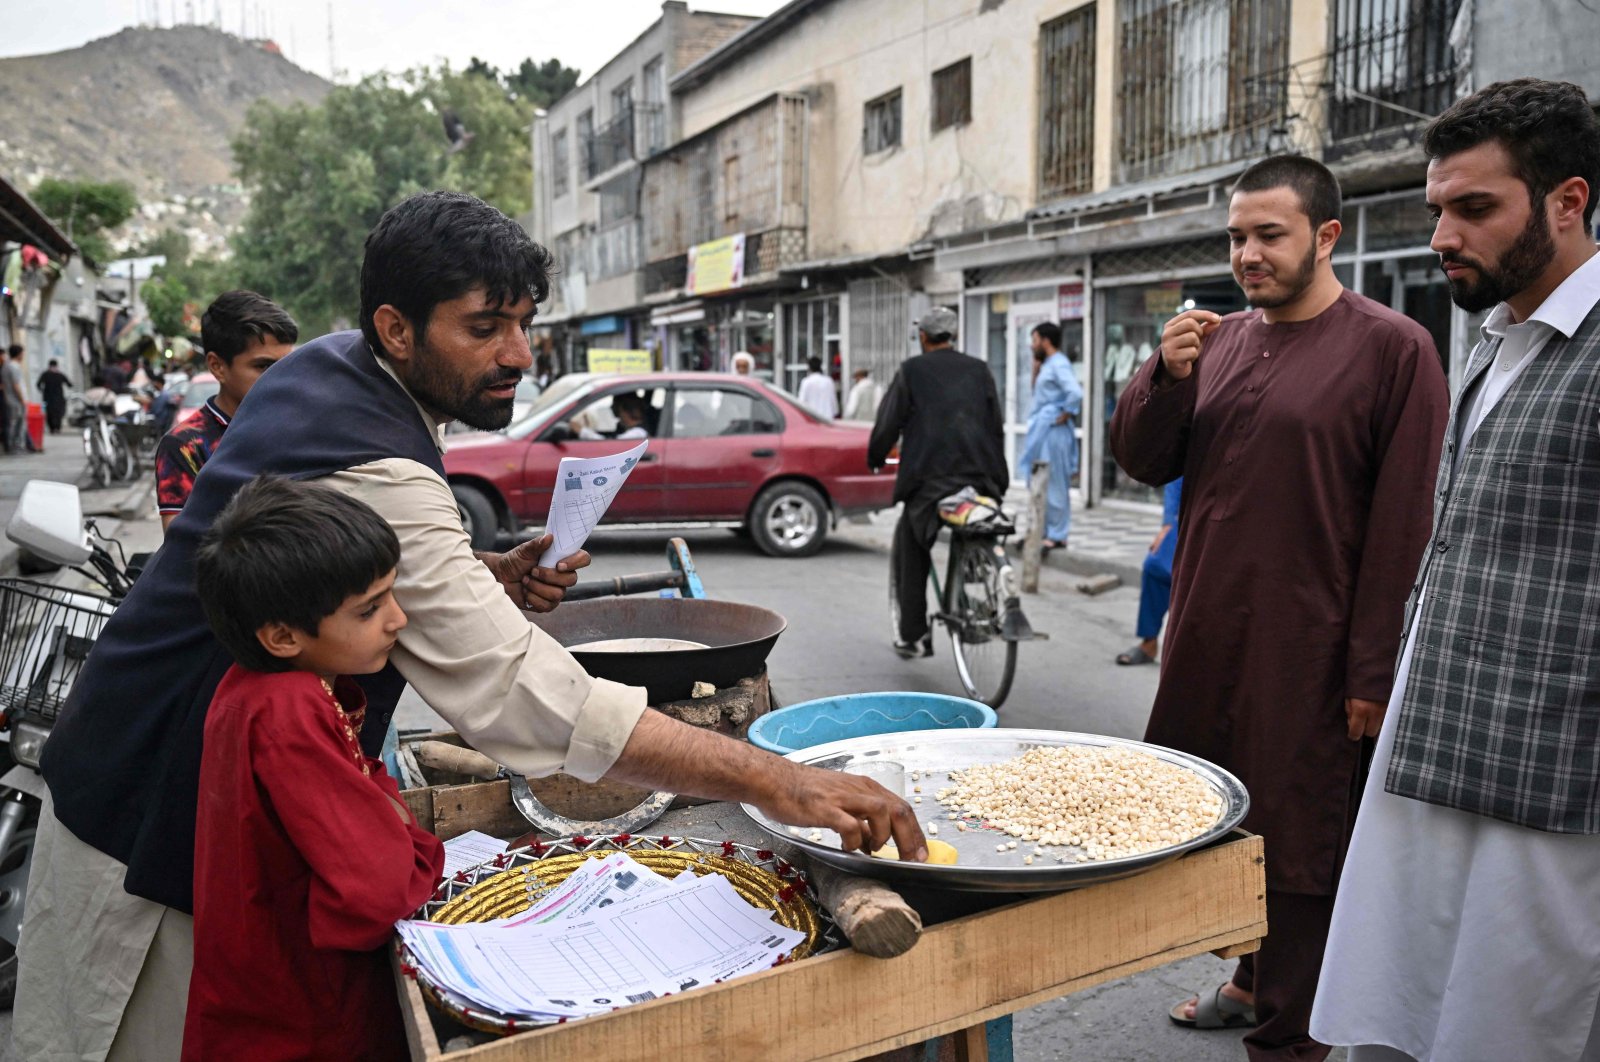 A vendor prepares roasted corn kernels for customers on the street in Kabul, Afghanistan, July 25, 2022. (AFP Photo)